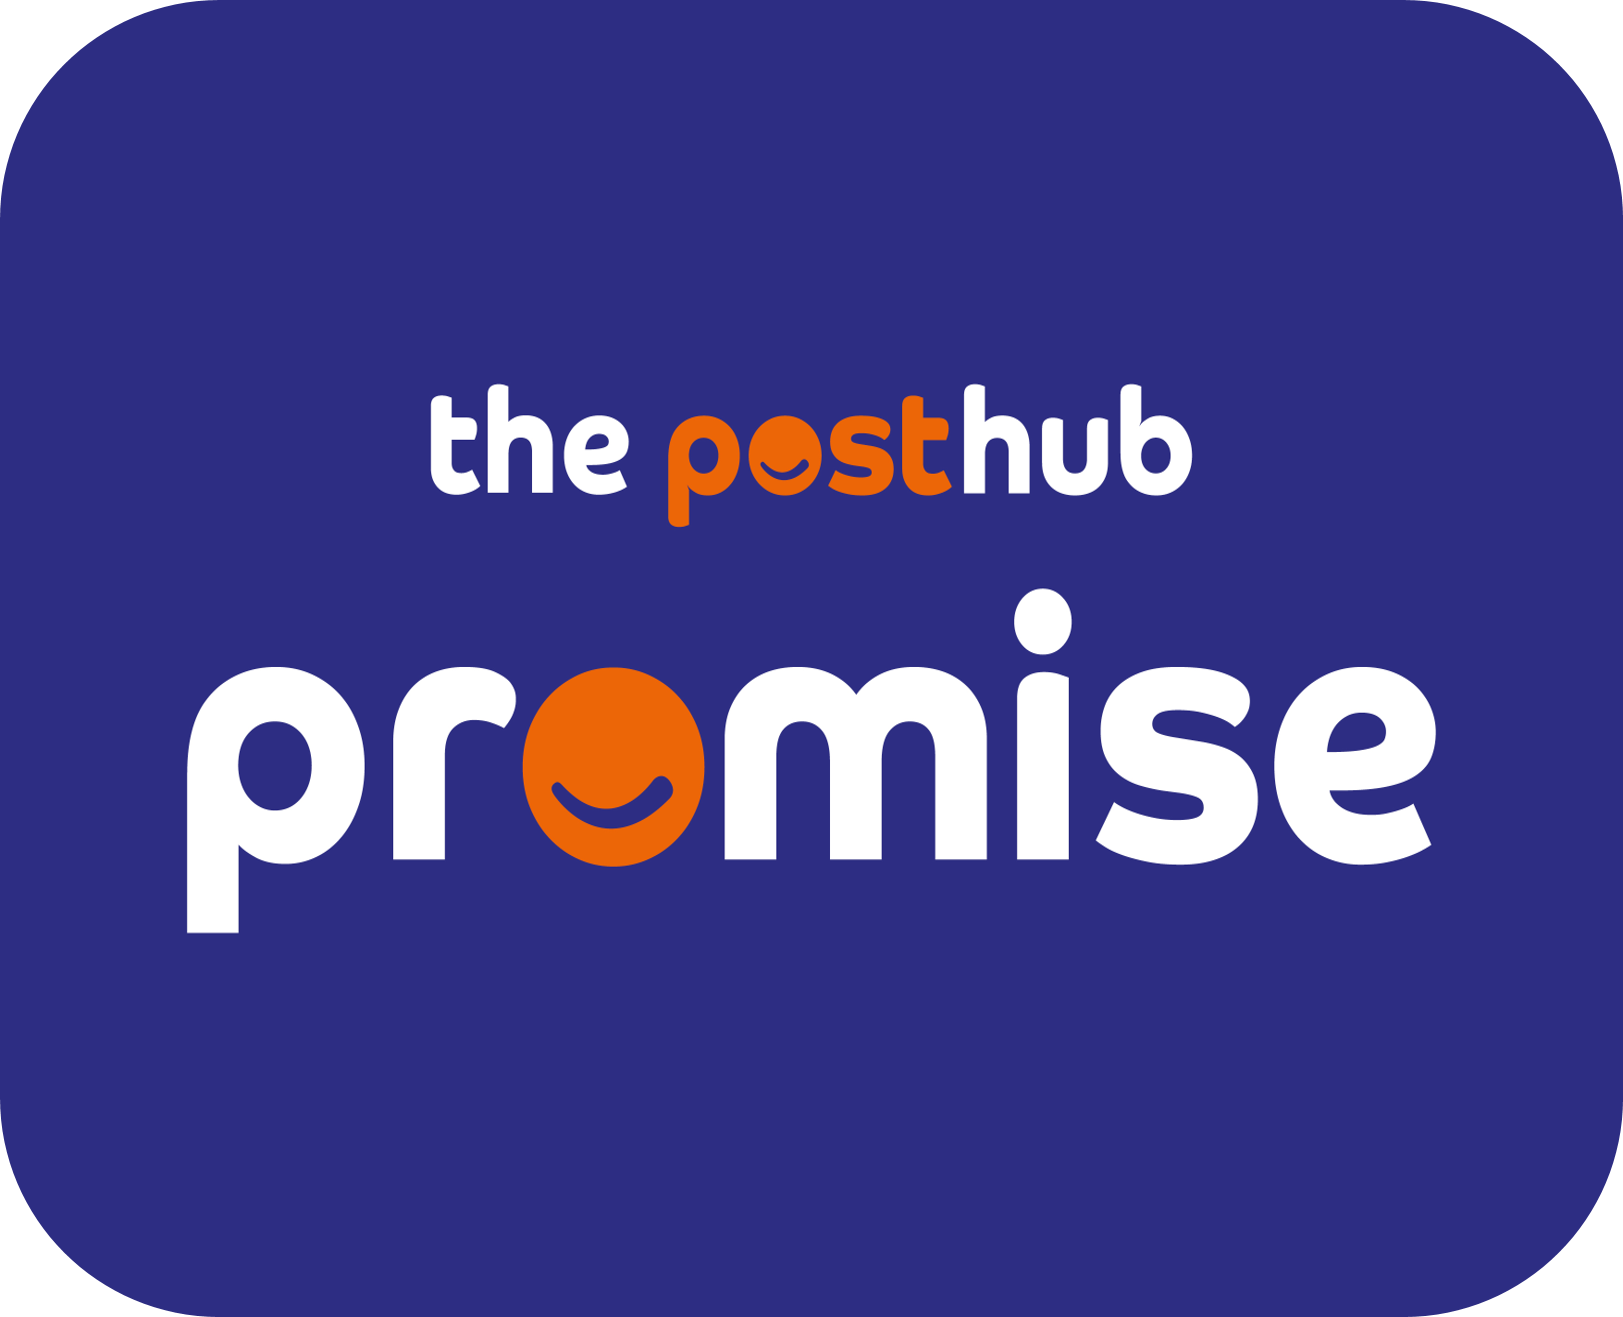 the posthub promise